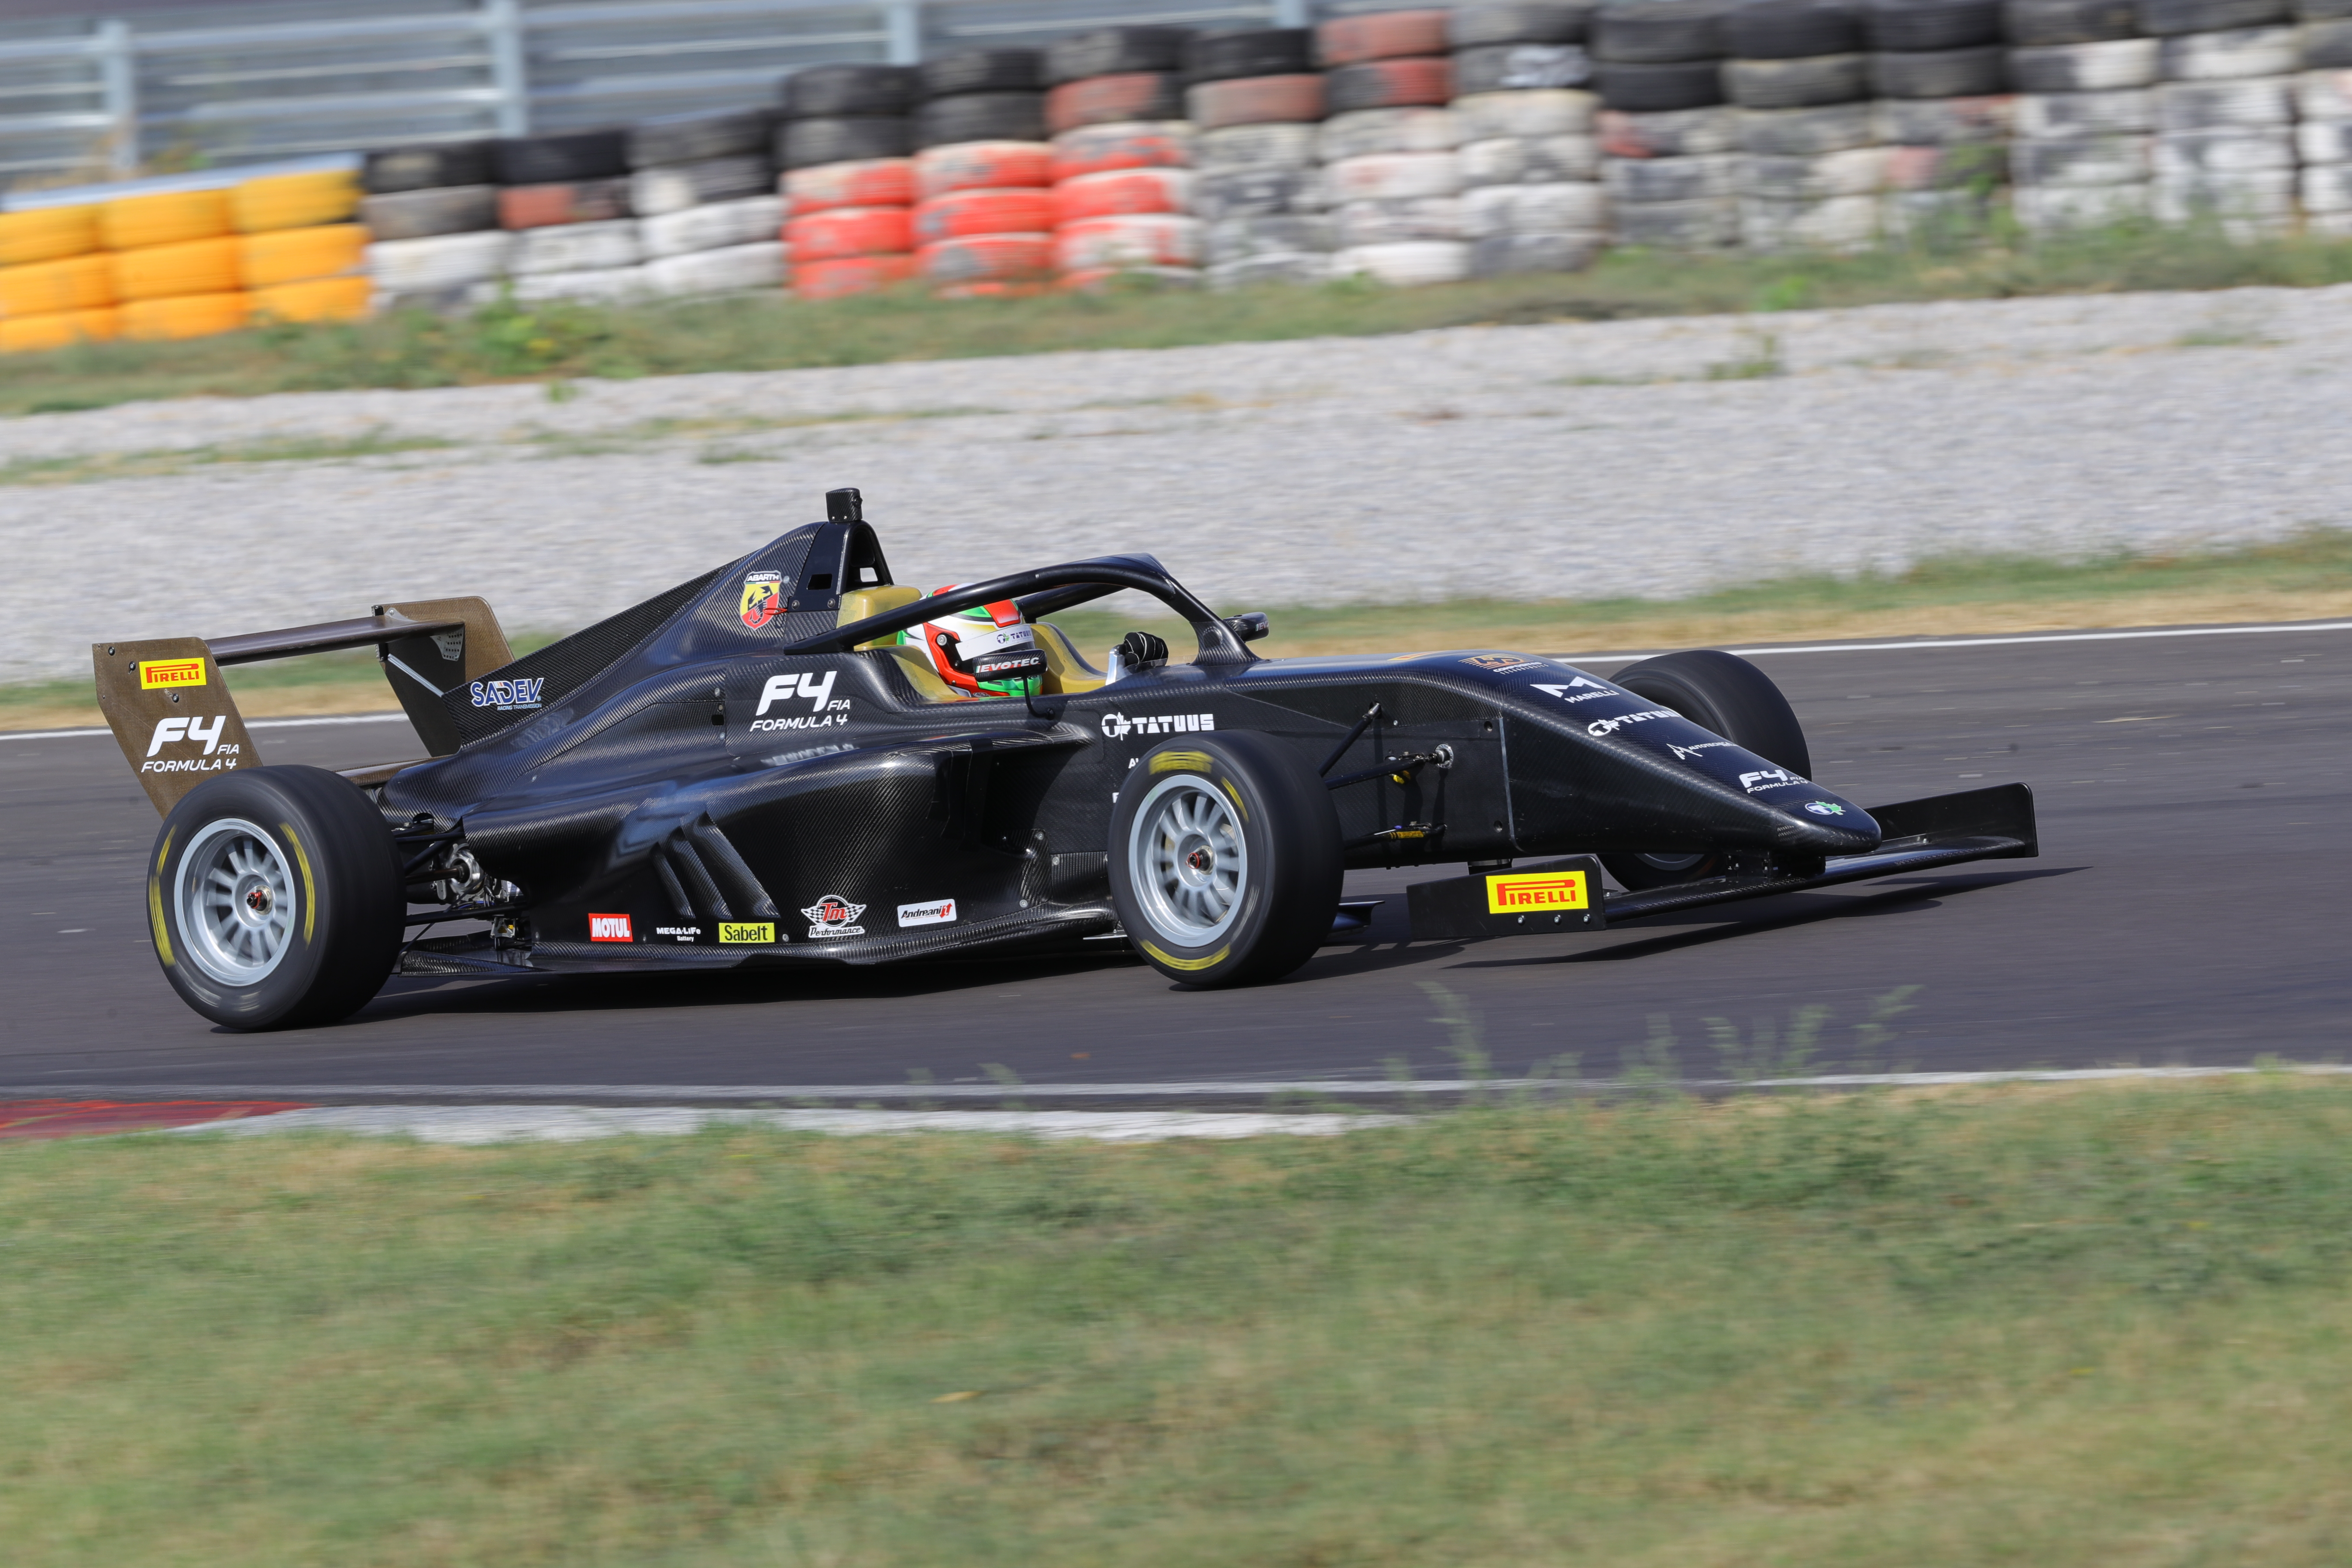 ACR Formula 4 will be more affordable, says promoter Josef Křenek about the new series